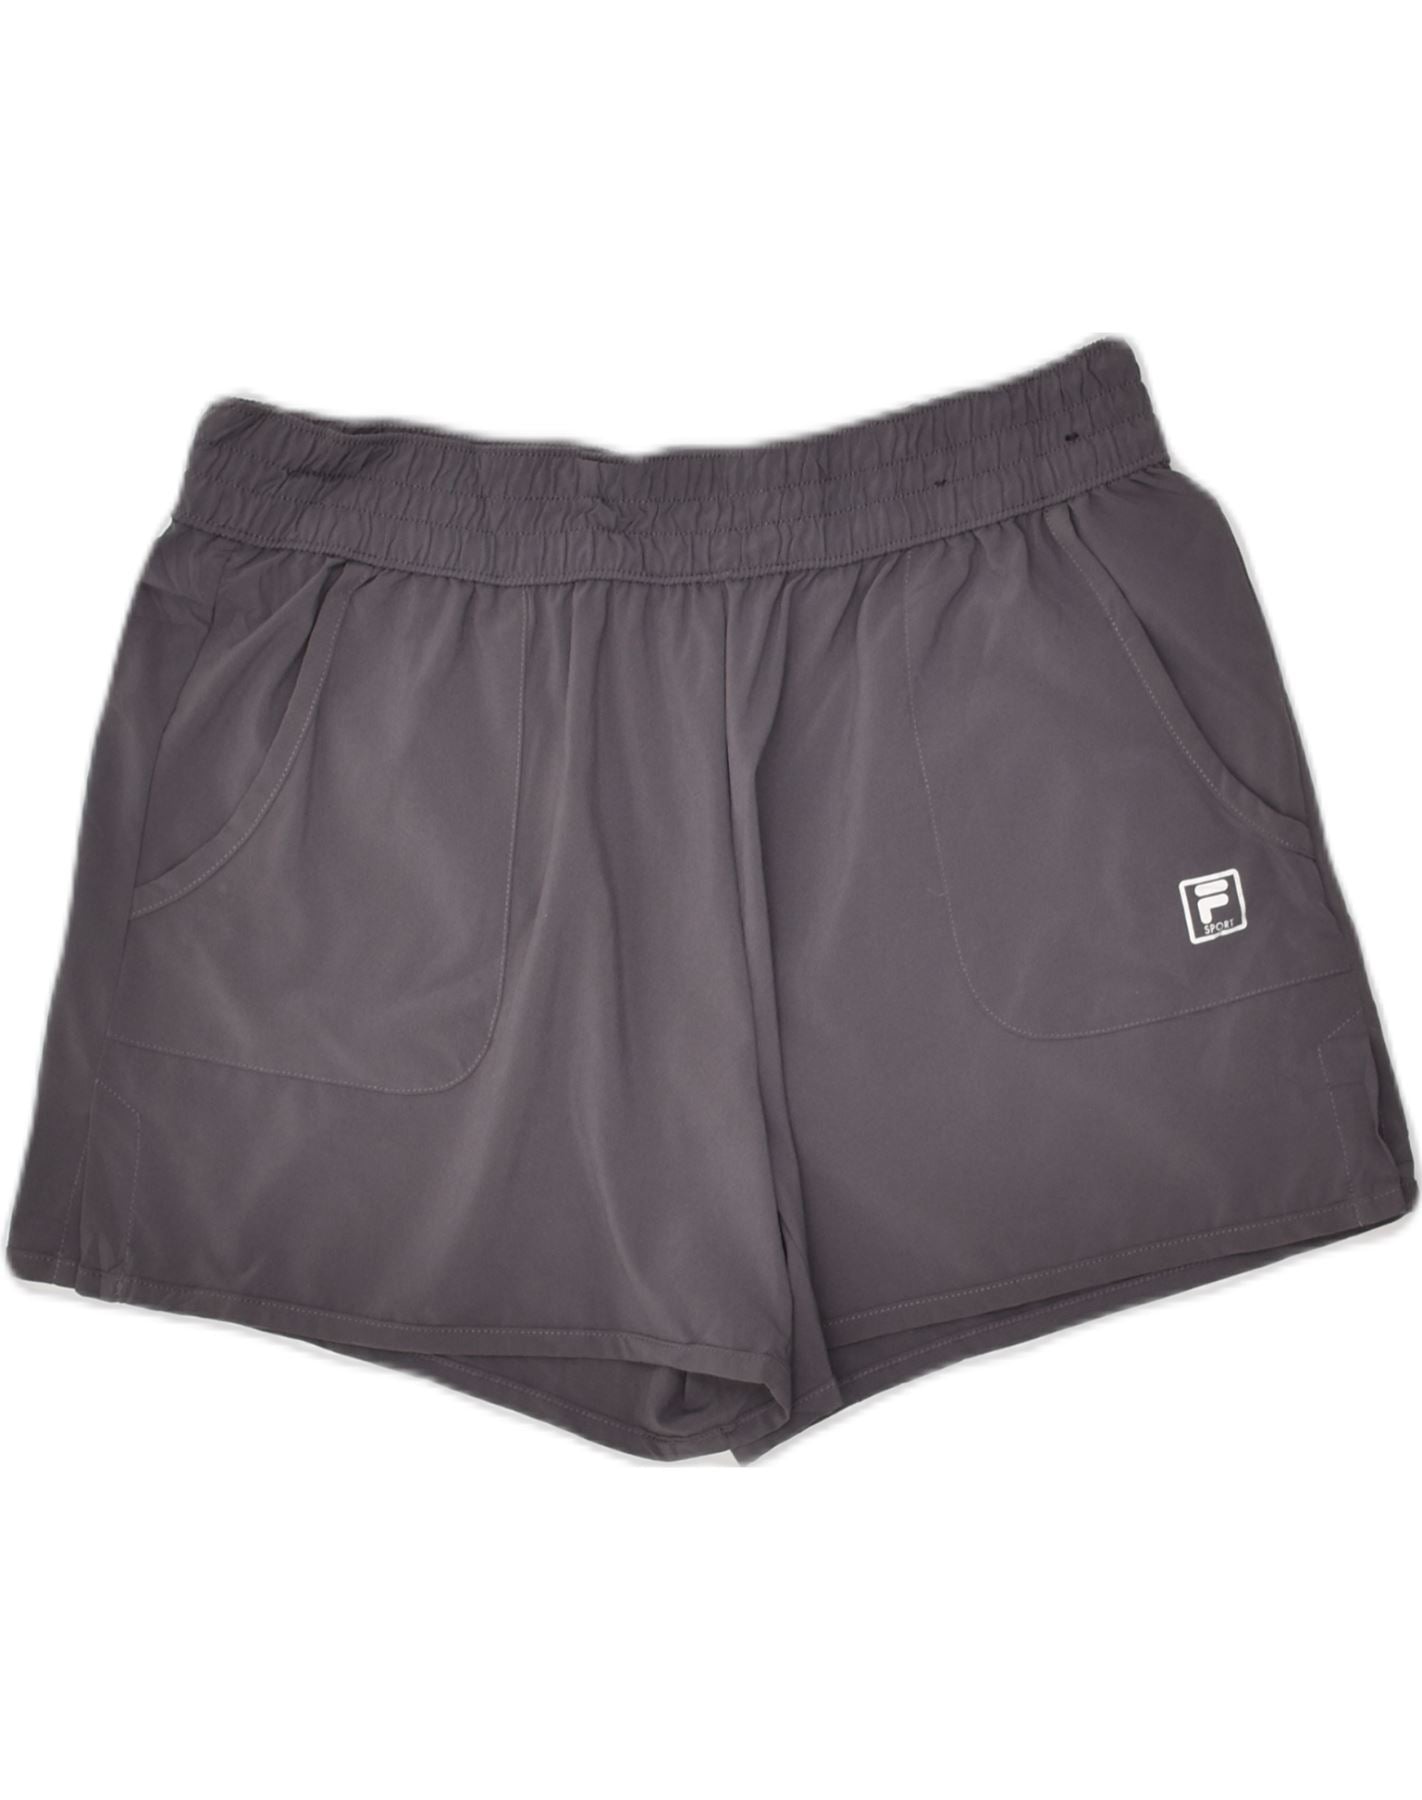 FILA Womens Sport Shorts UK 8 Small Grey Polyester, Vintage & Second-Hand  Clothing Online